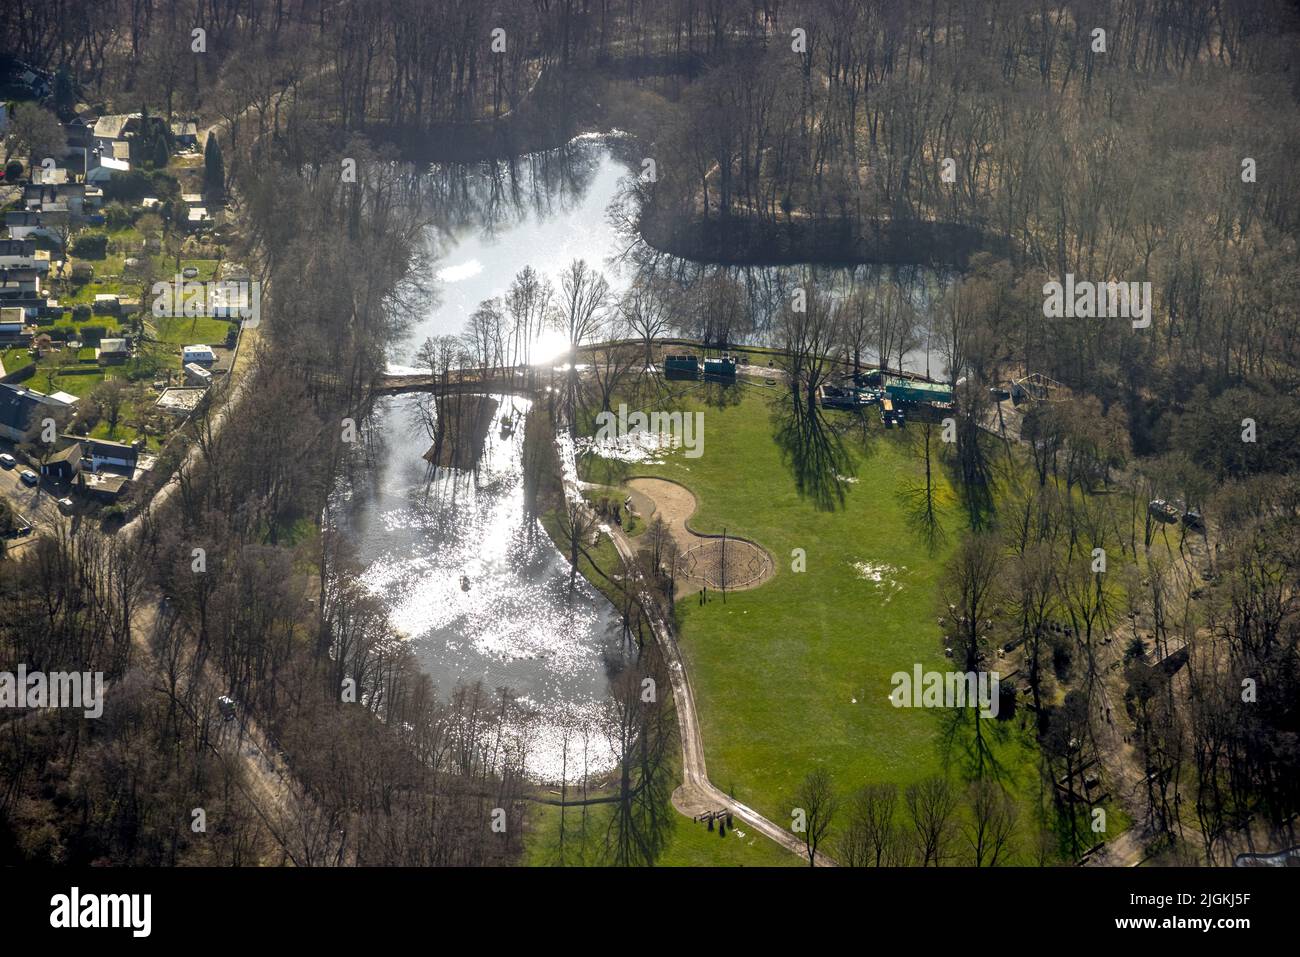 Aerial view, Revierpark Vonderort with desilting works at ponds in the district Osterfeld in Oberhausen, Ruhr area, North Rhine-Westphalia, Germany, D Stock Photo